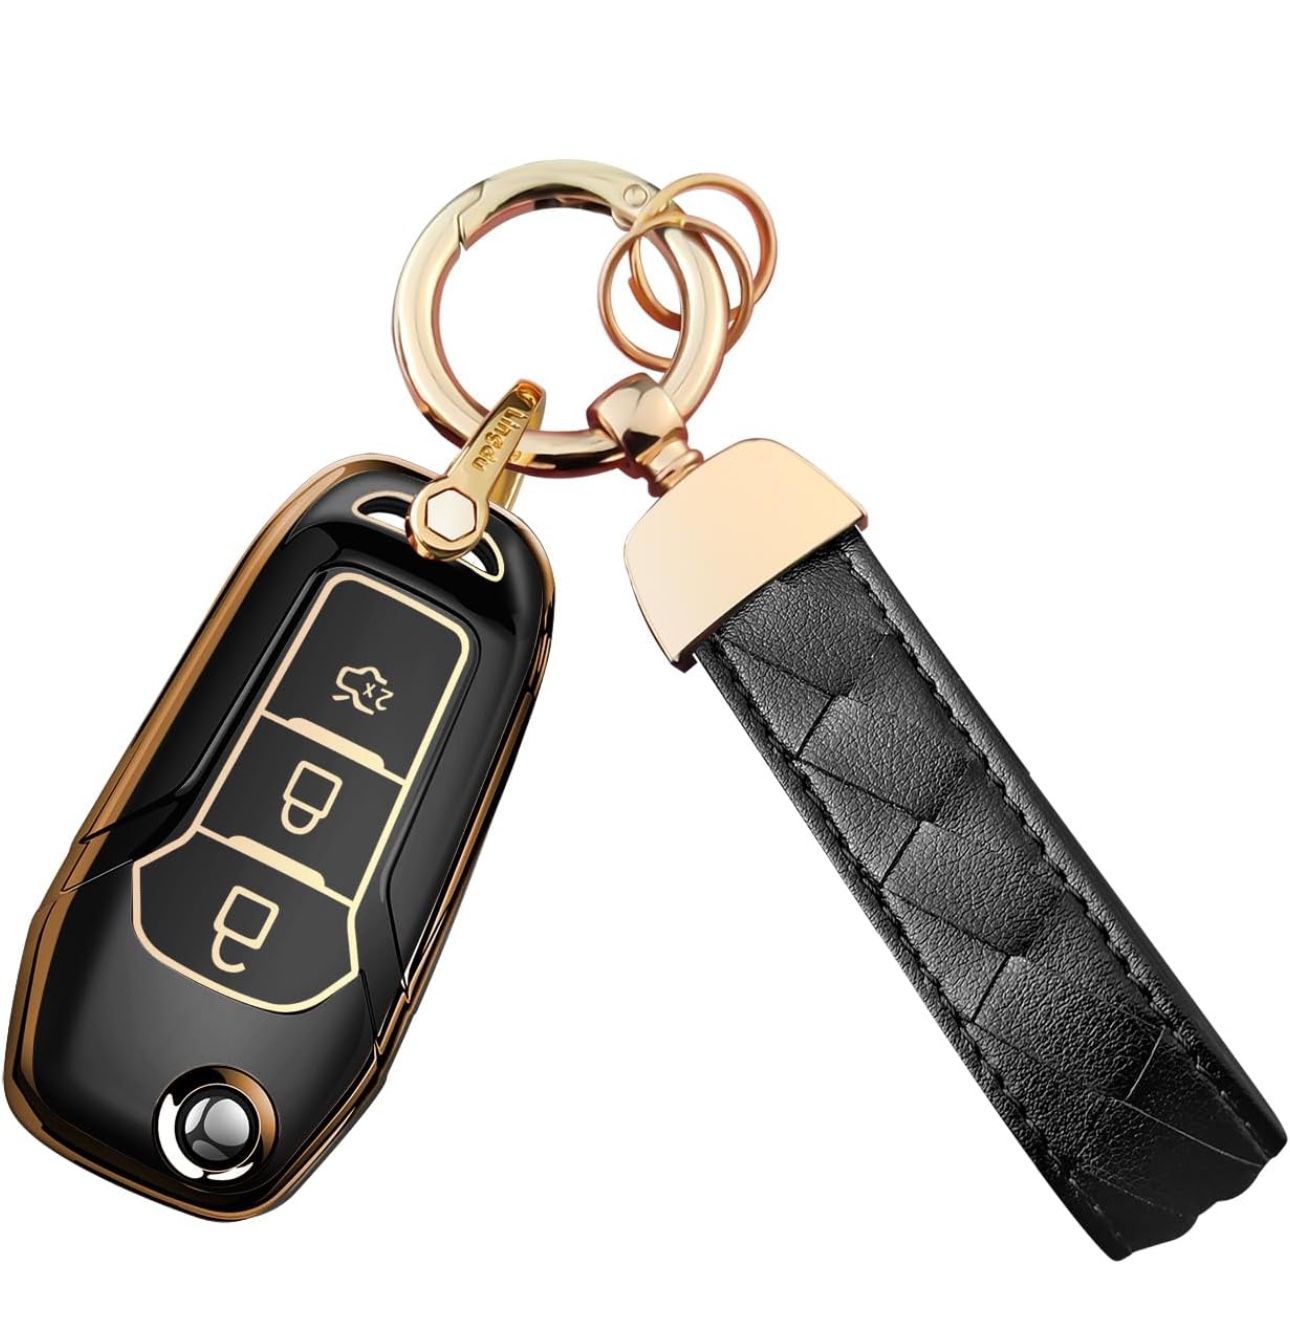 for Ford Key Fob Cover Keychain Fit for,2015 2016 2017 2018 2019 F150 F250,Focus 3 Escort Kuga Everest Fiesta Mustang Edge MKV S-MAX Fusion 2016 Range